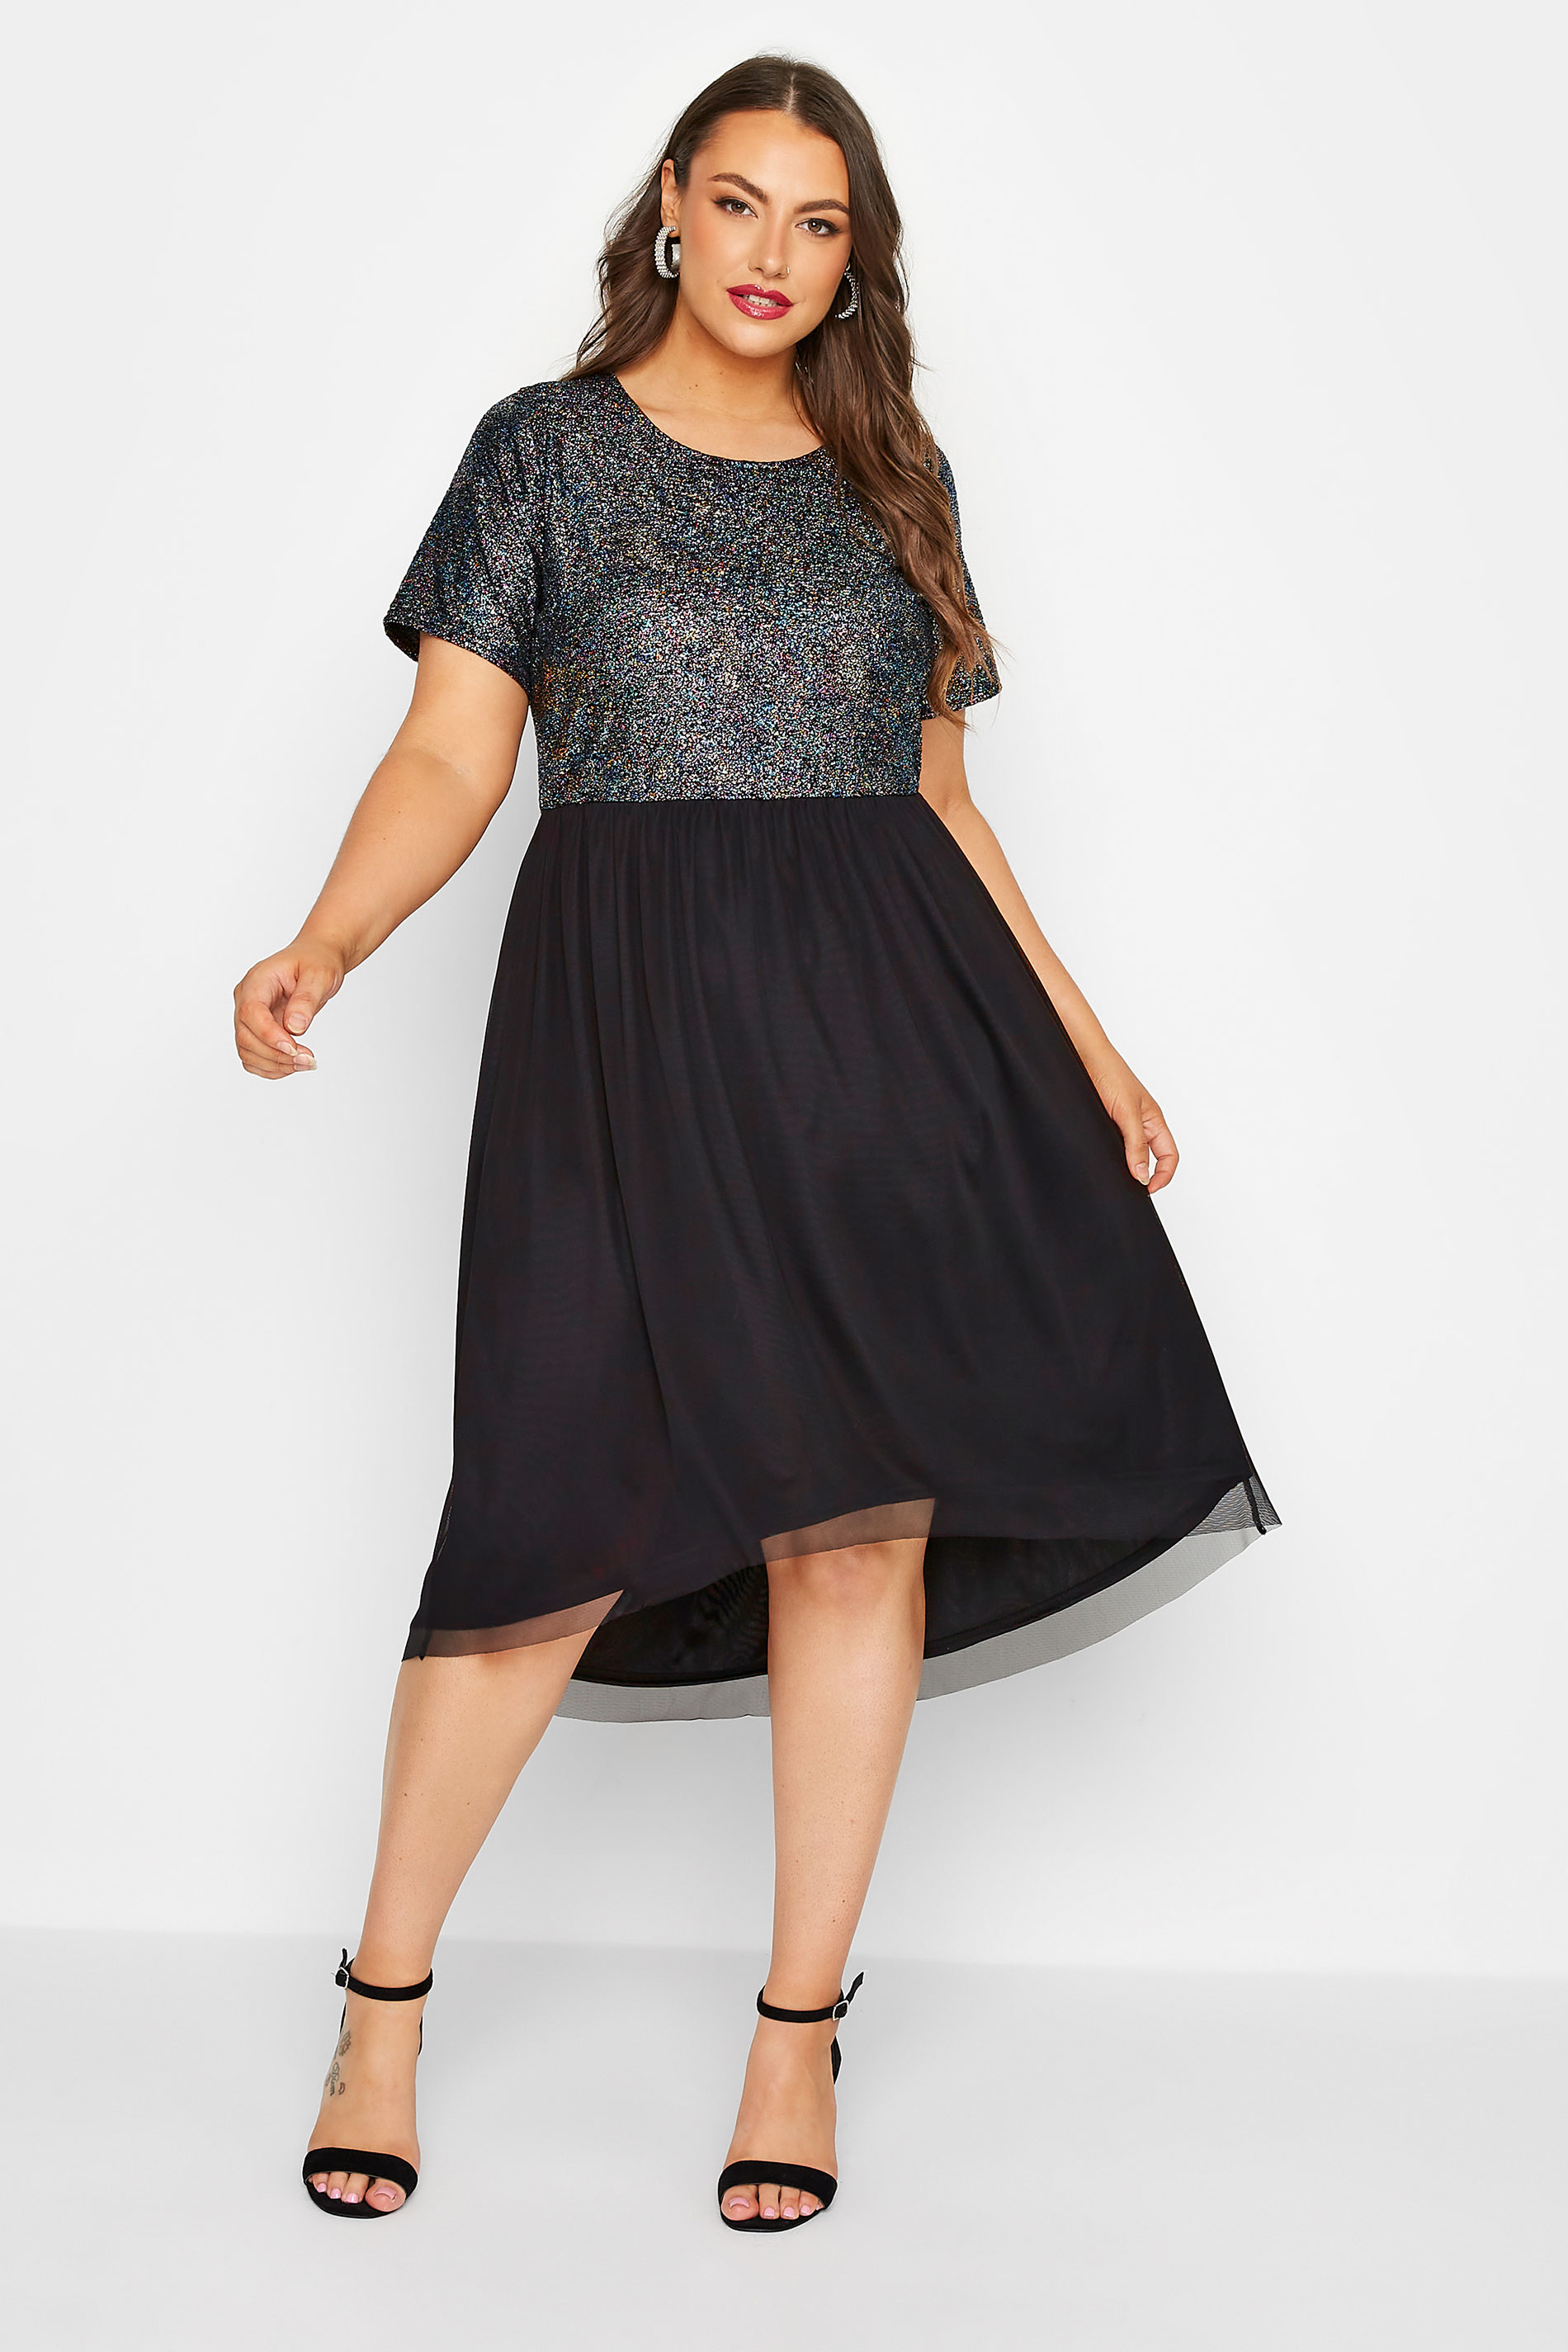 LIMITED COLLECTION Plus Size Black Glitter Mesh Dress | Yours Clothing 1